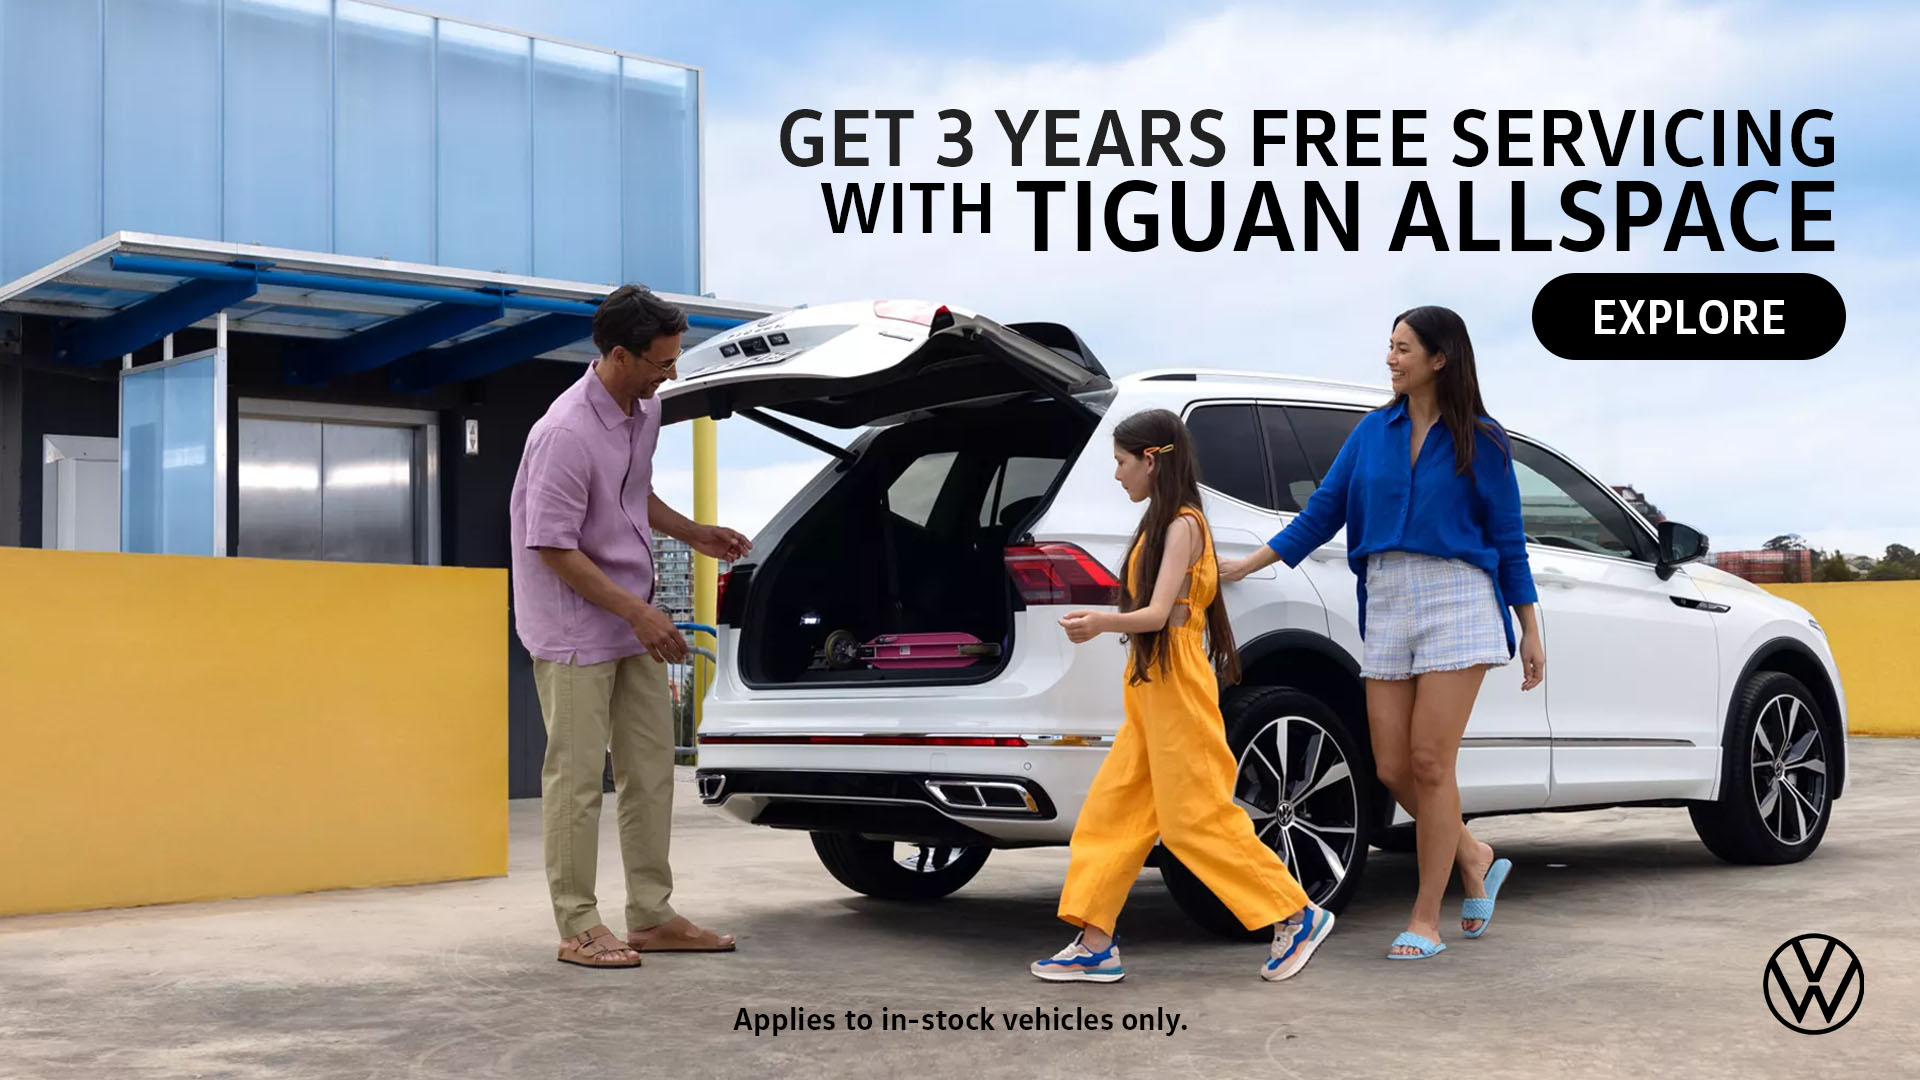 Get 3 Years Free Servicing with Tiguan Allspace